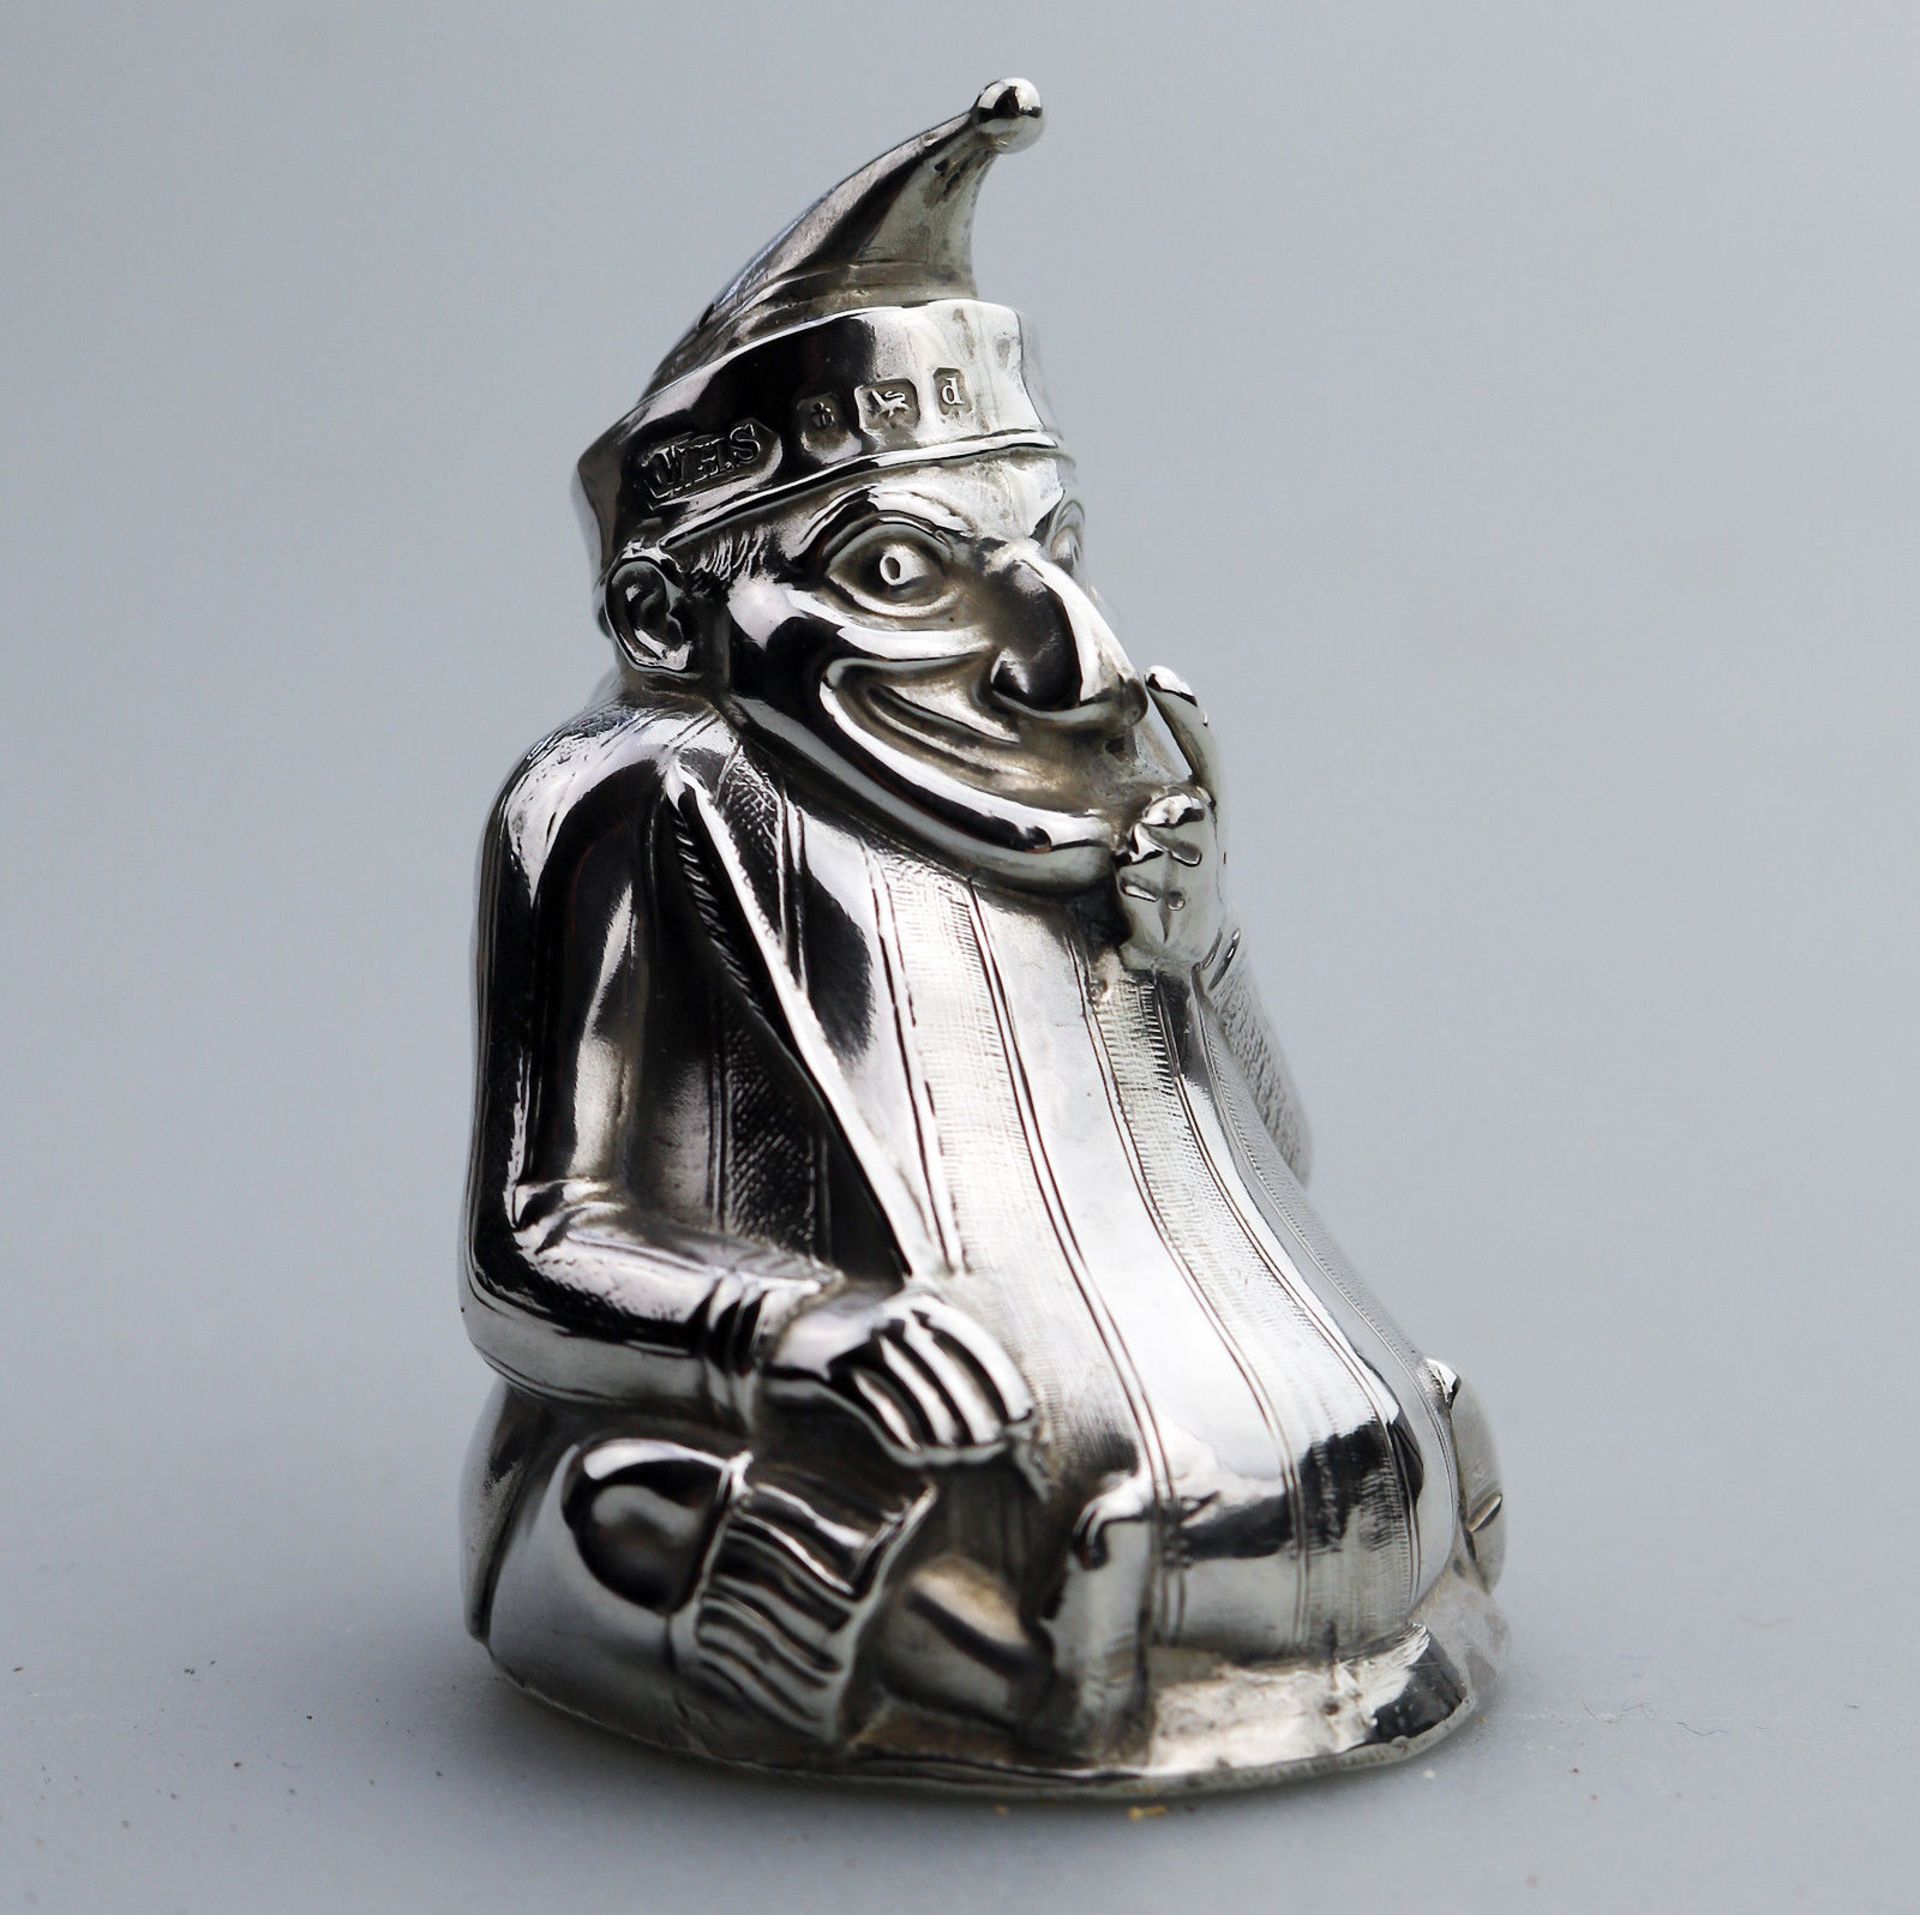 A rare solid silver novelty Mr Punch Pepper shaker by William Sparrow C.1903